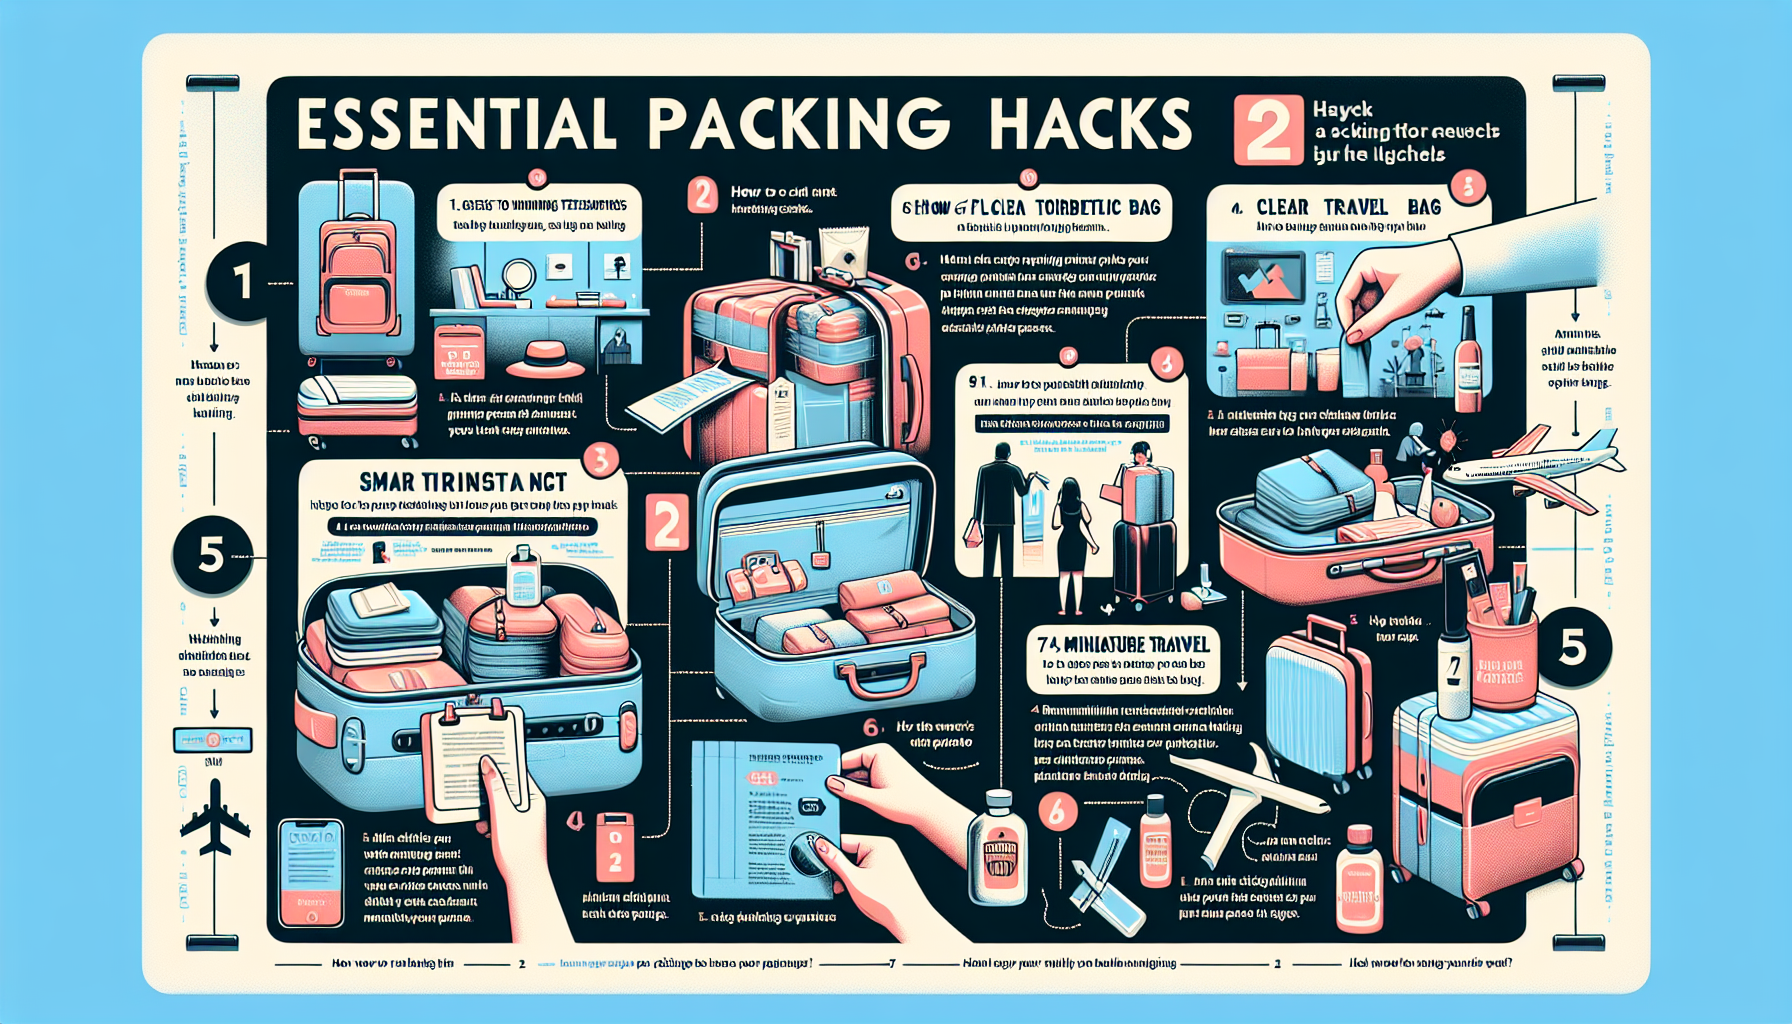 discover essential packing hacks that could be the key to stress-free travel with this insightful article.